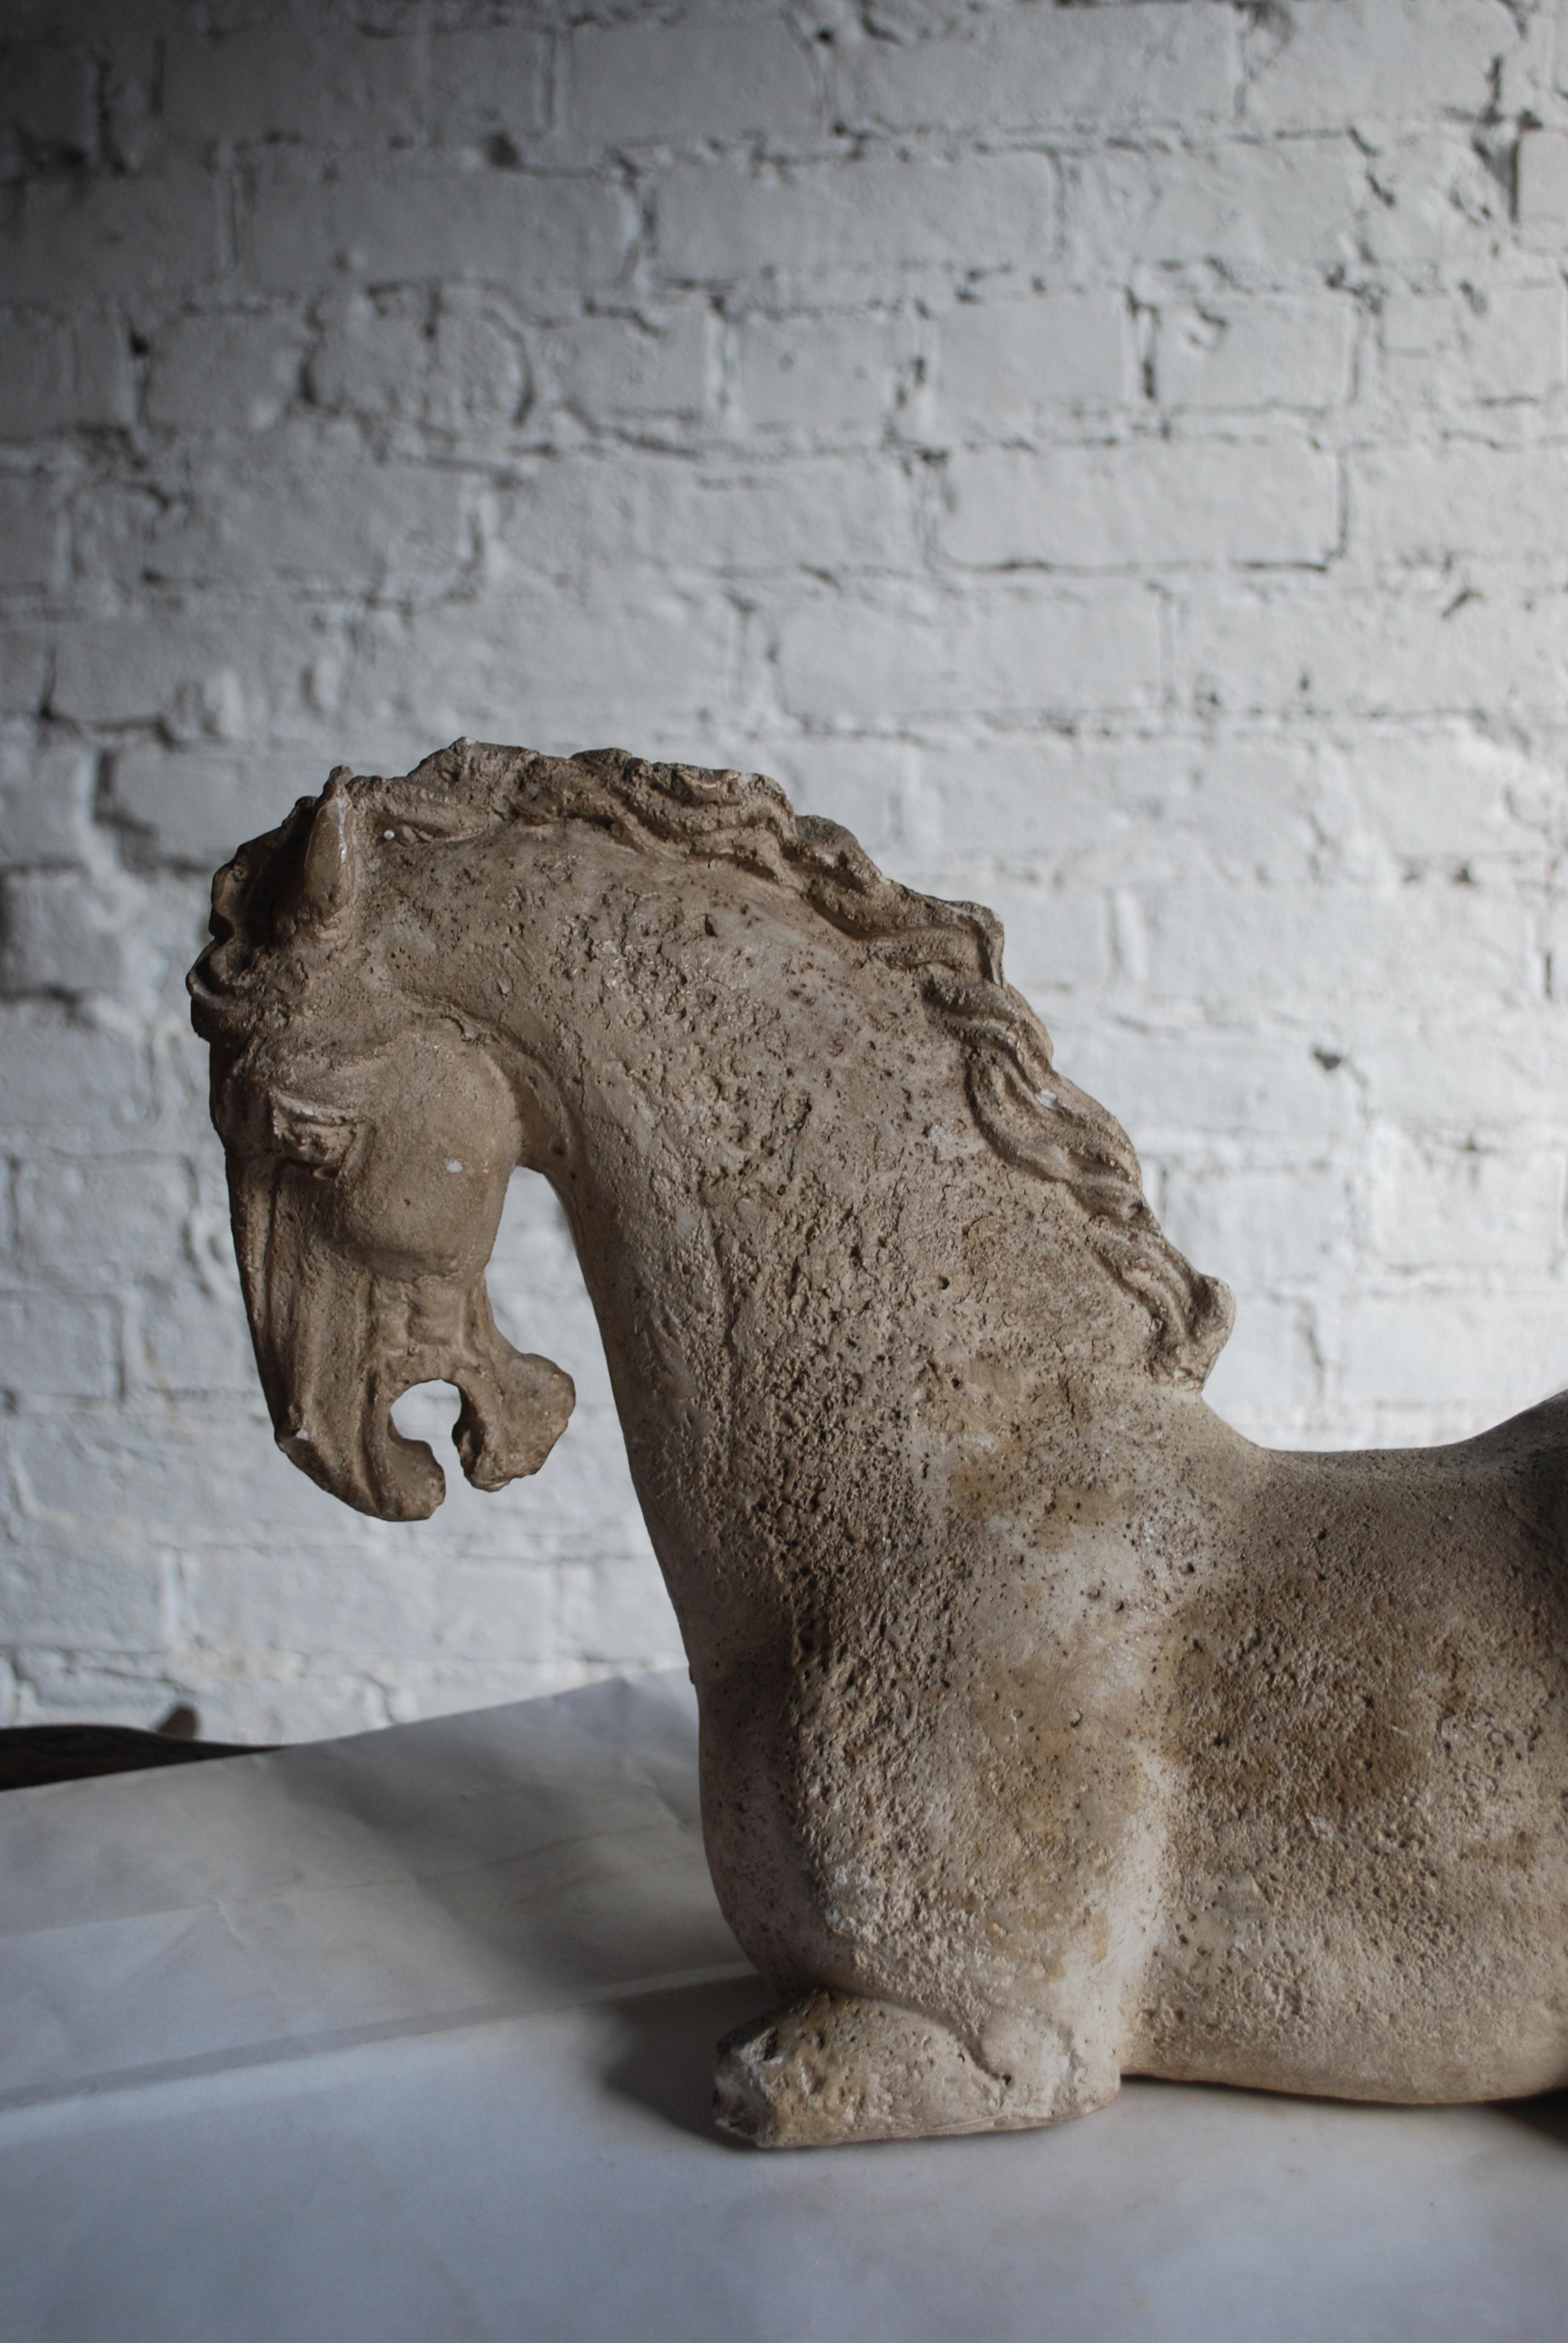 Mid-20th century reproduction of 17th century resting horse in plaster over iron.